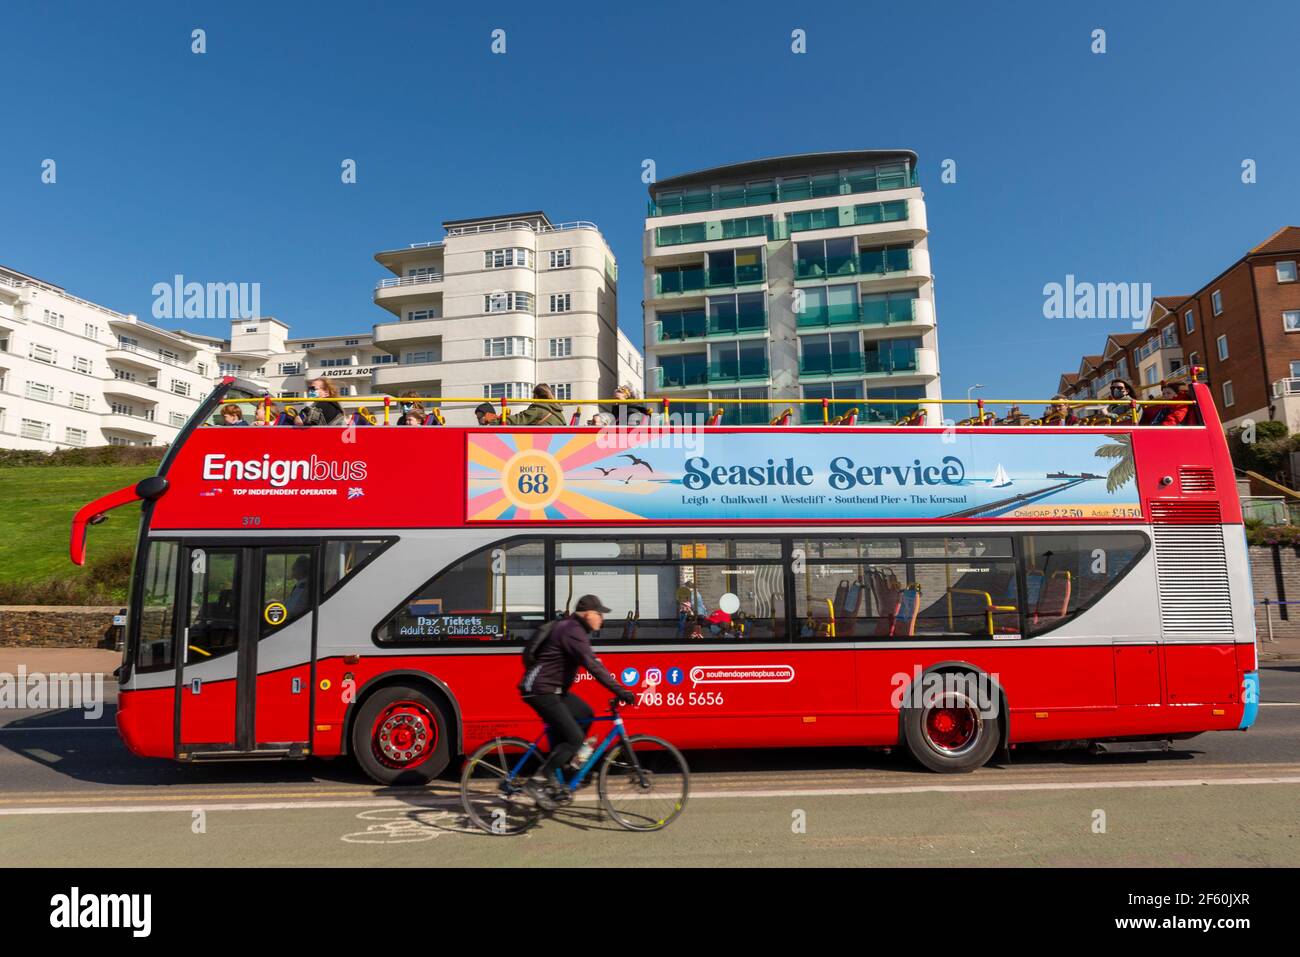 Southend on Sea, Essex, UK. 29th Mar, 2021. The first day of the UK’s easing of lockdown has cleared into a bright and sunny day, though remaining cool. Ensignbus have commenced their seafront 'Seaside Service' open top bus service. Passengers on top deck passing seafront properties. Cyclist in cycle lane Stock Photo